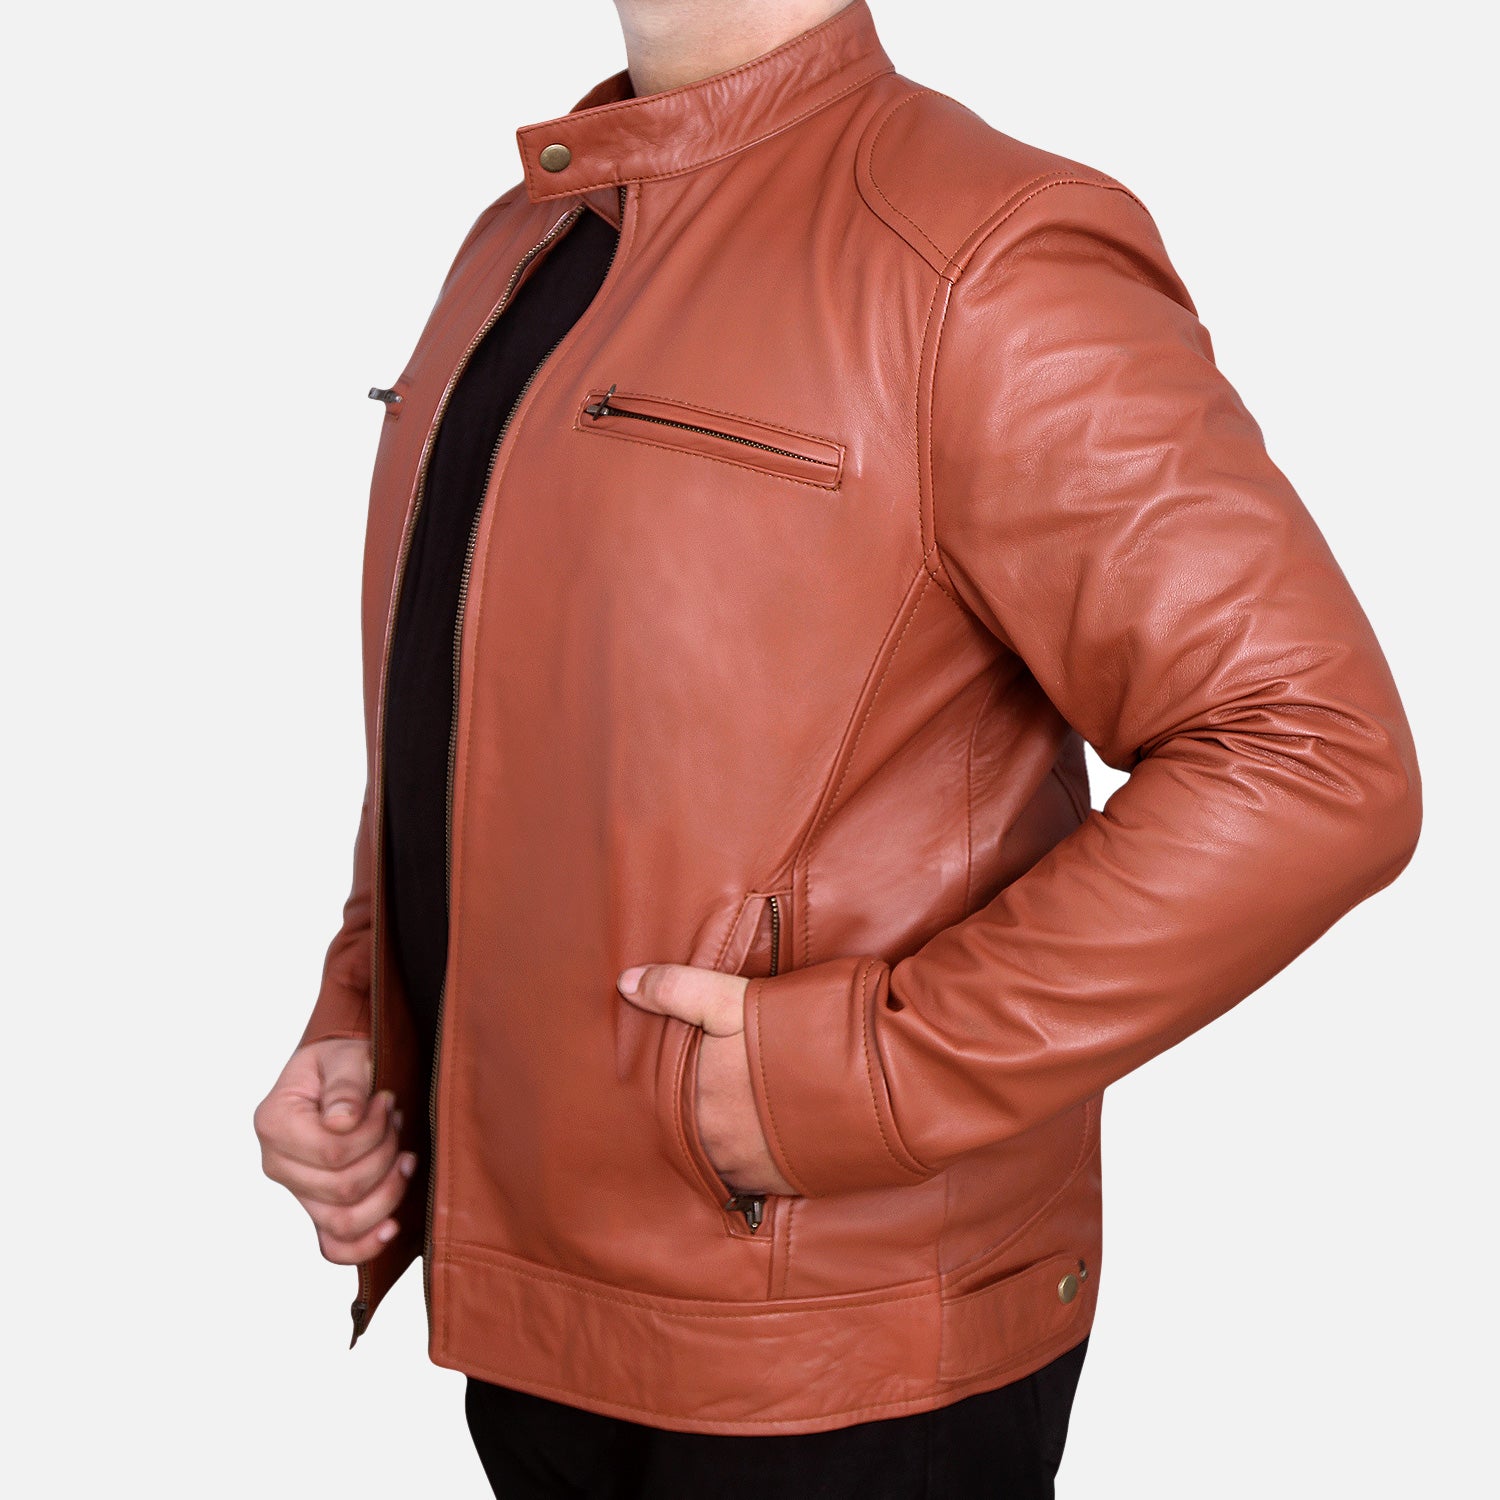 Motorcycle Leather Jacket for Men Tan